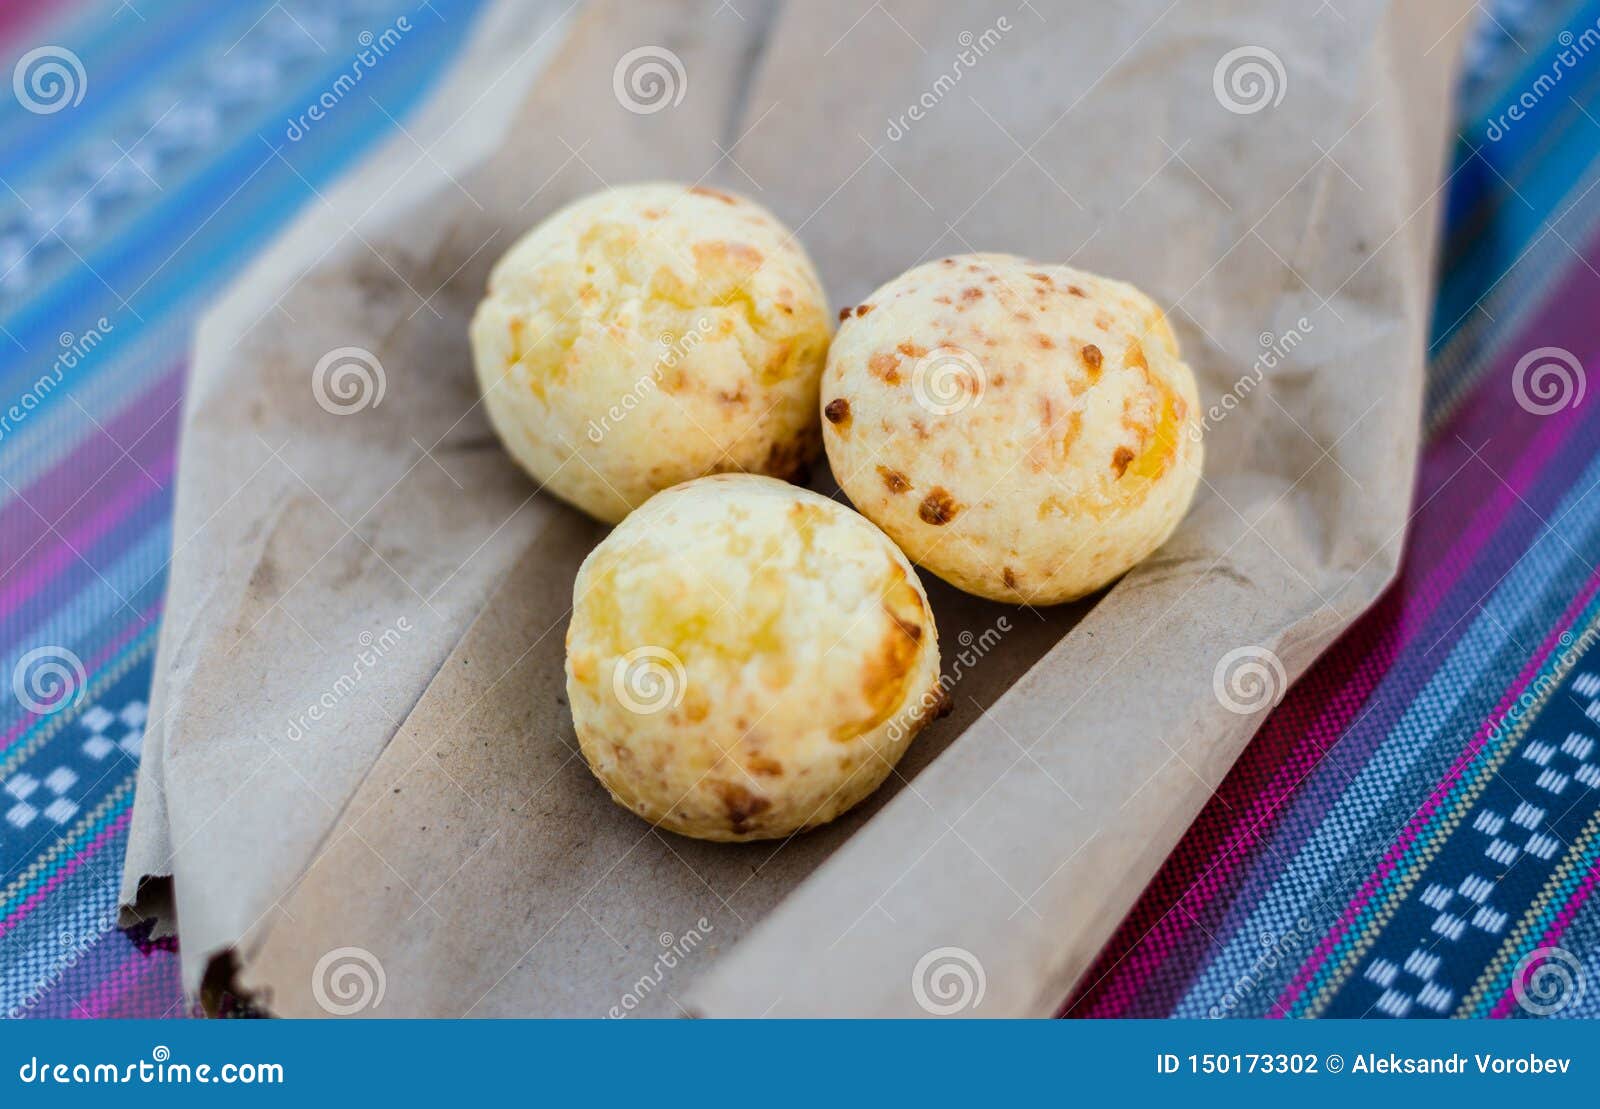 brazilian and paraguayan pan de queso or cheese bread at a street food market